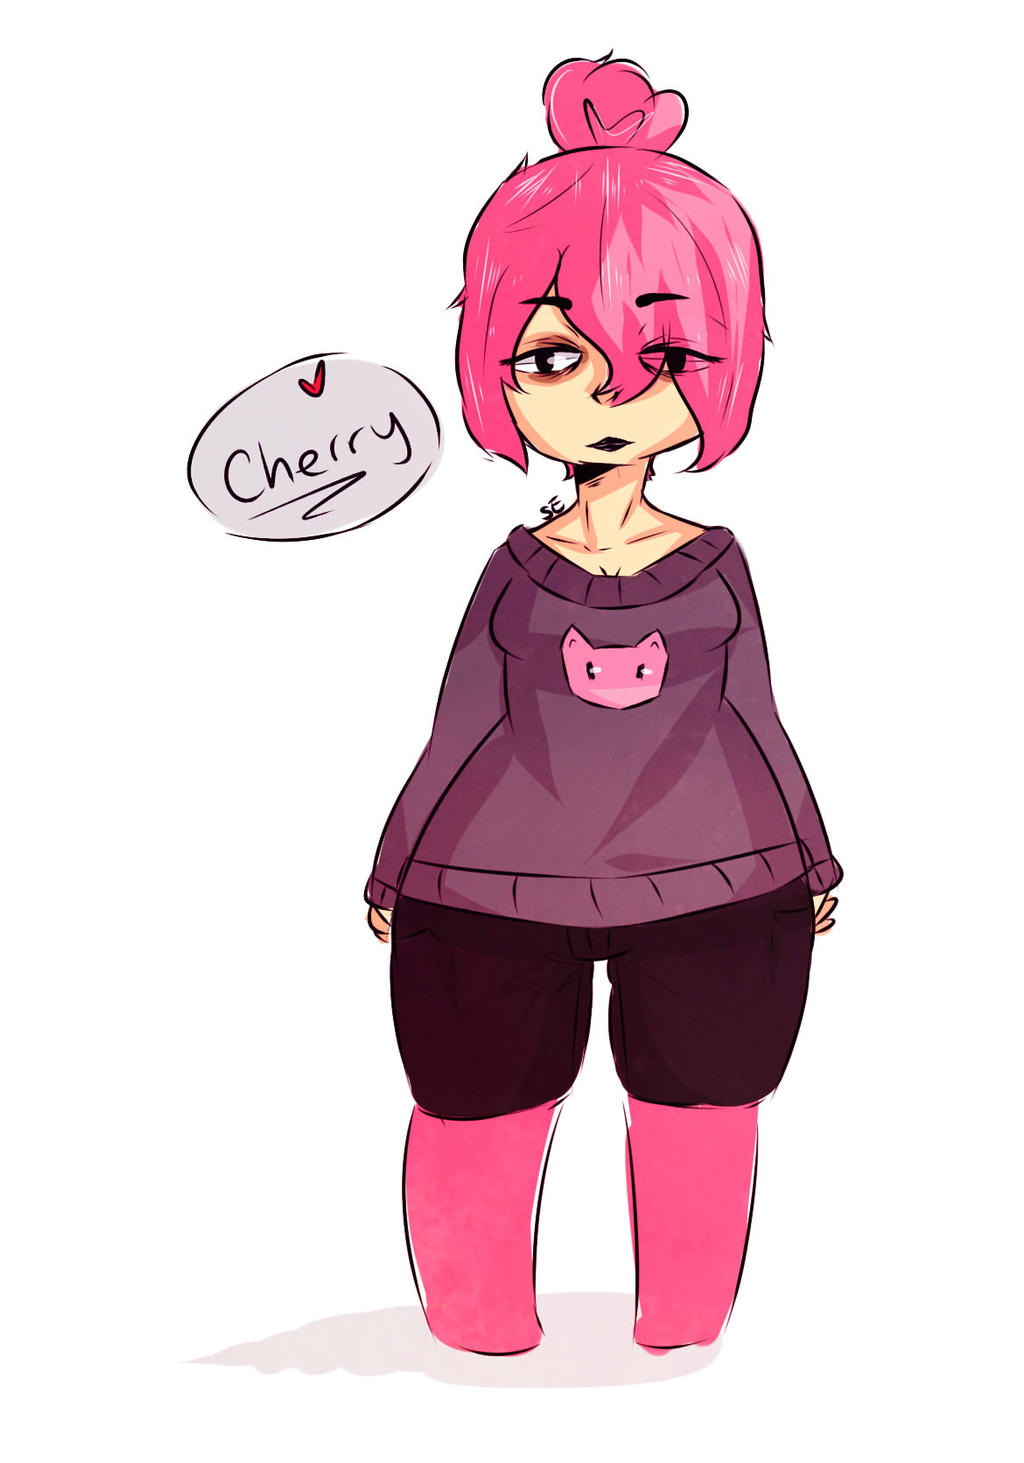 Chubby Cherry - Studio Killers by sophdoodles on DeviantArt